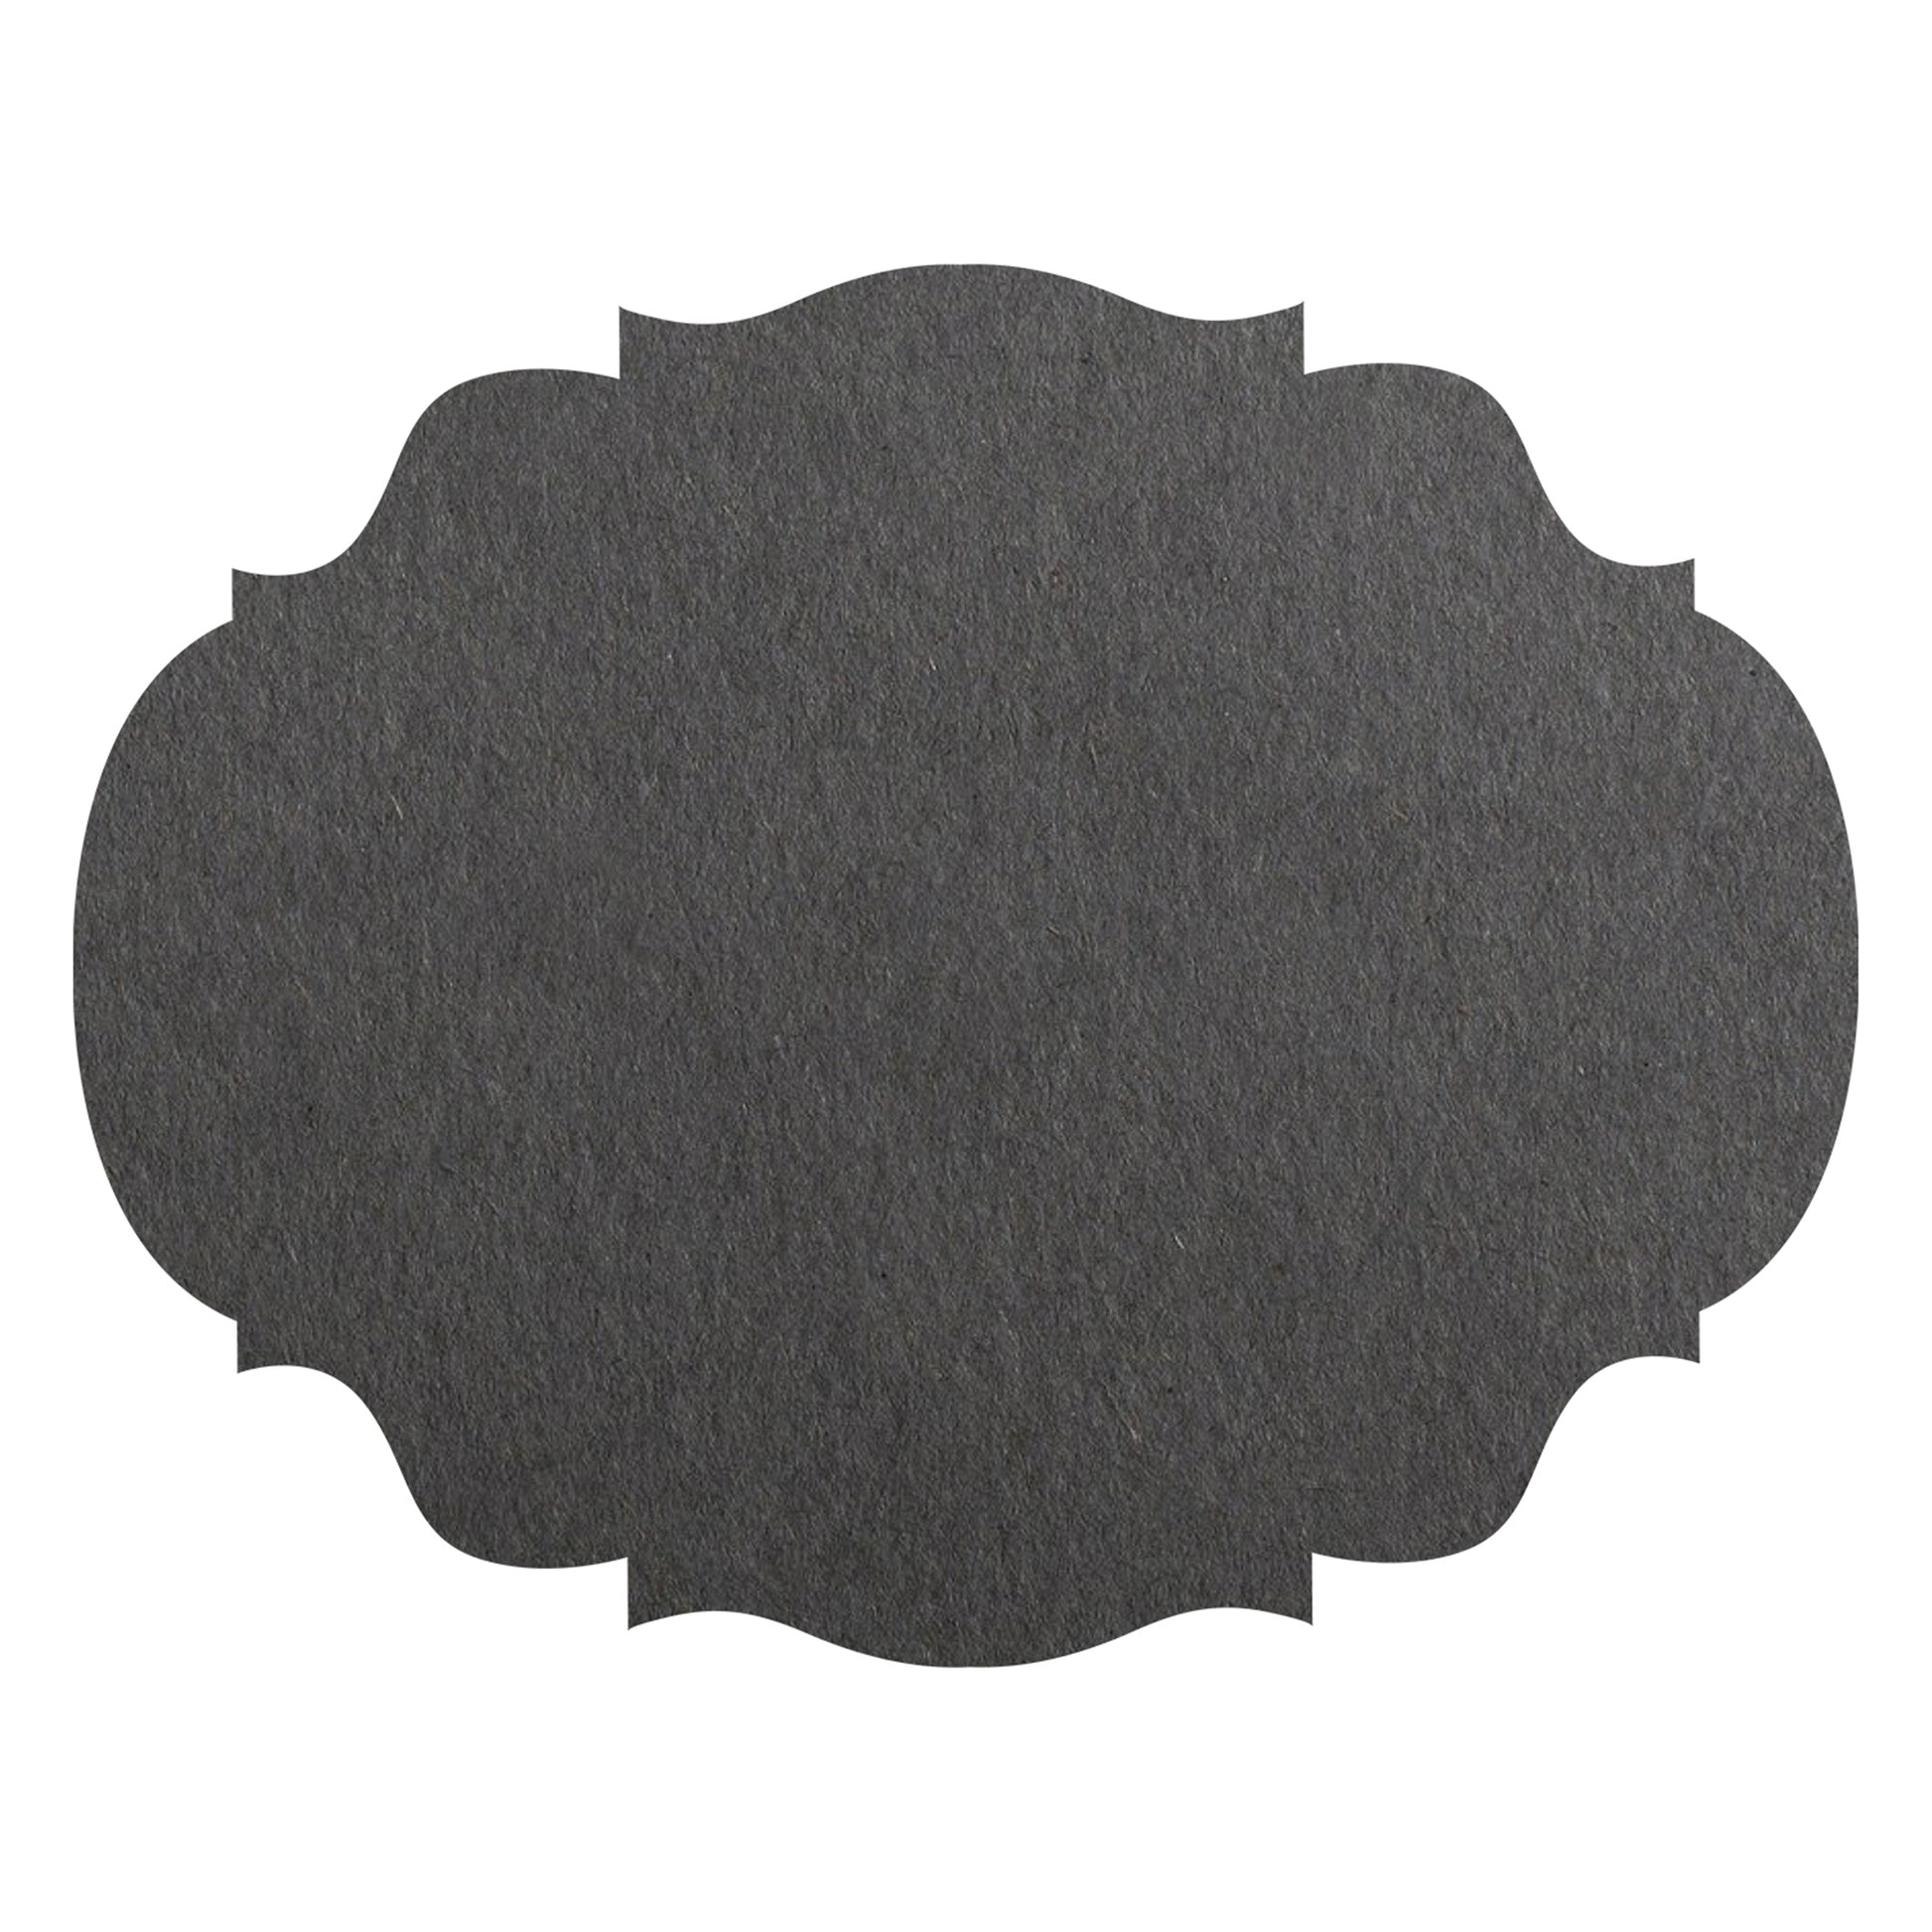 A dark gray french frame paper placemat that is disposable.